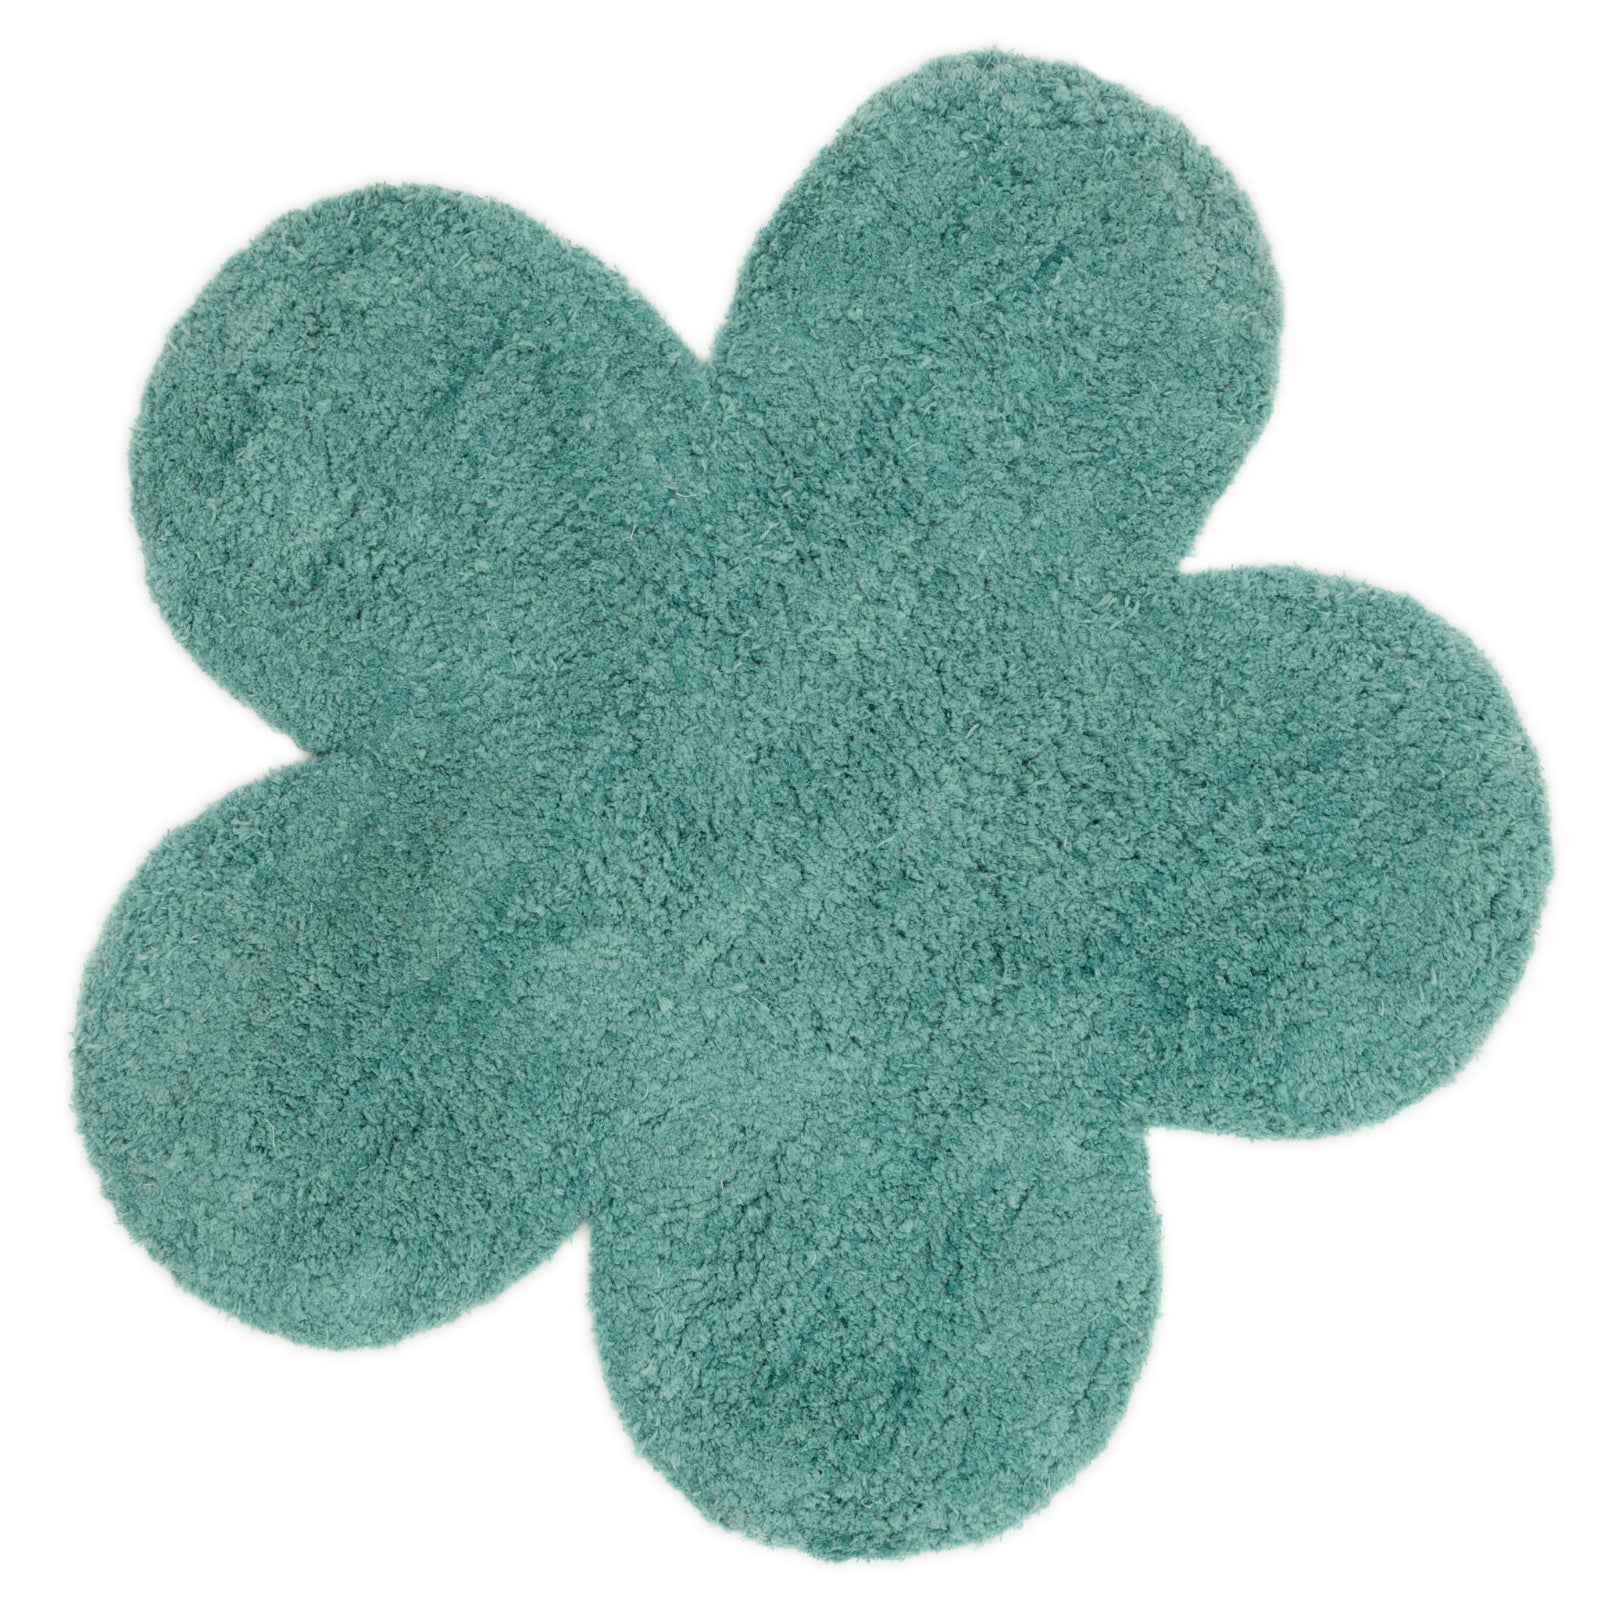 Loloi Sophie HSO04 Teal Area Rug main image